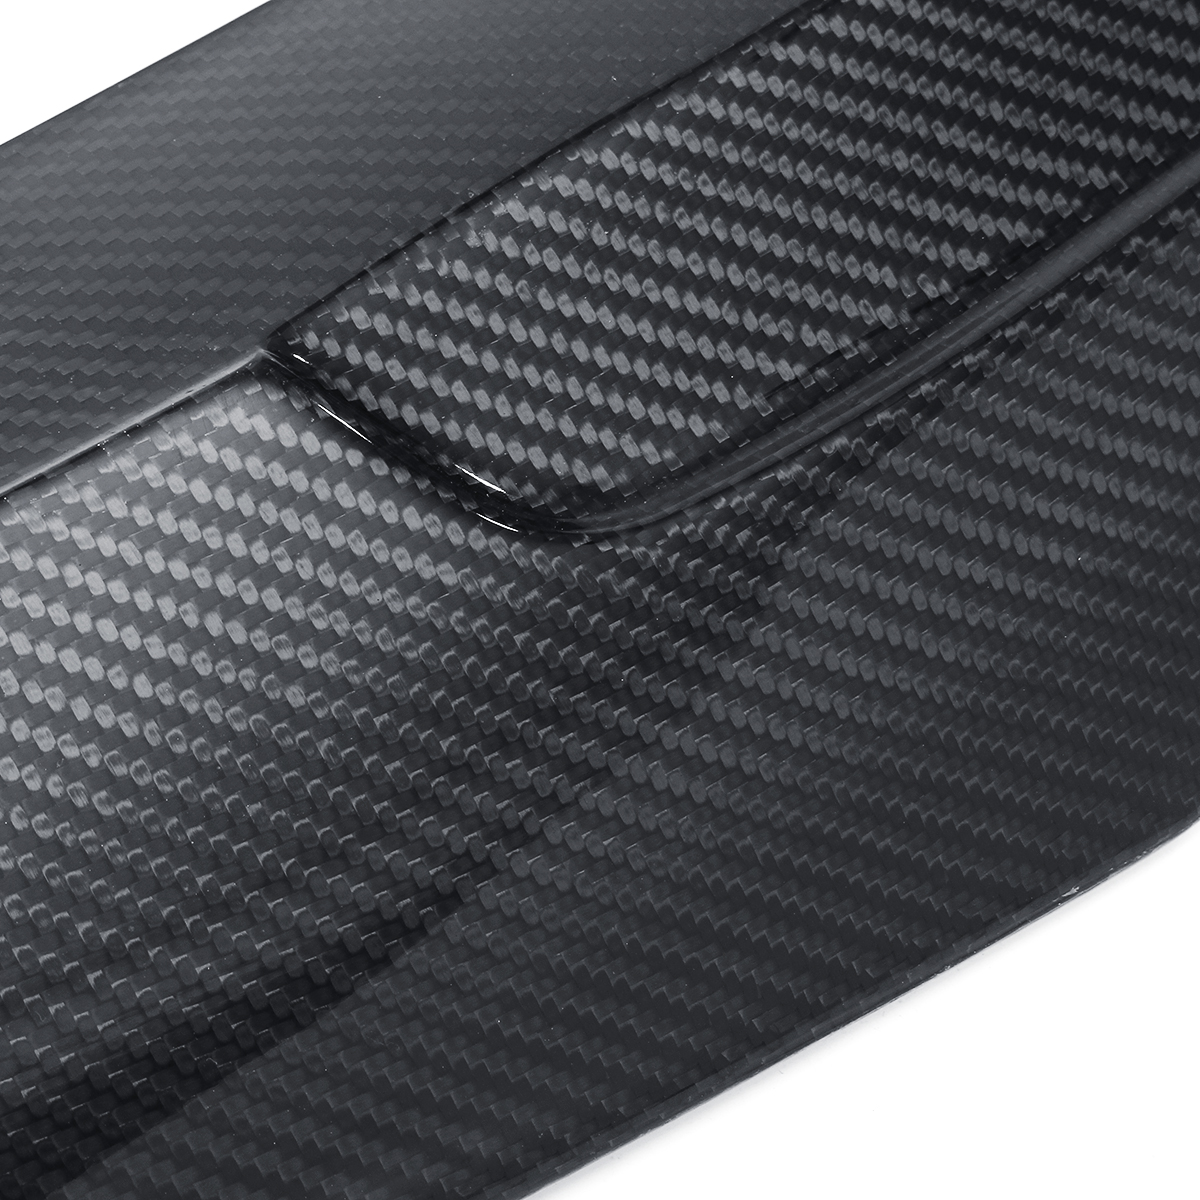 Carbon Fiber PSM Style Car Trunk Spoiler Wing for BMW E93 335I 328I M3 Convertible 2007-13